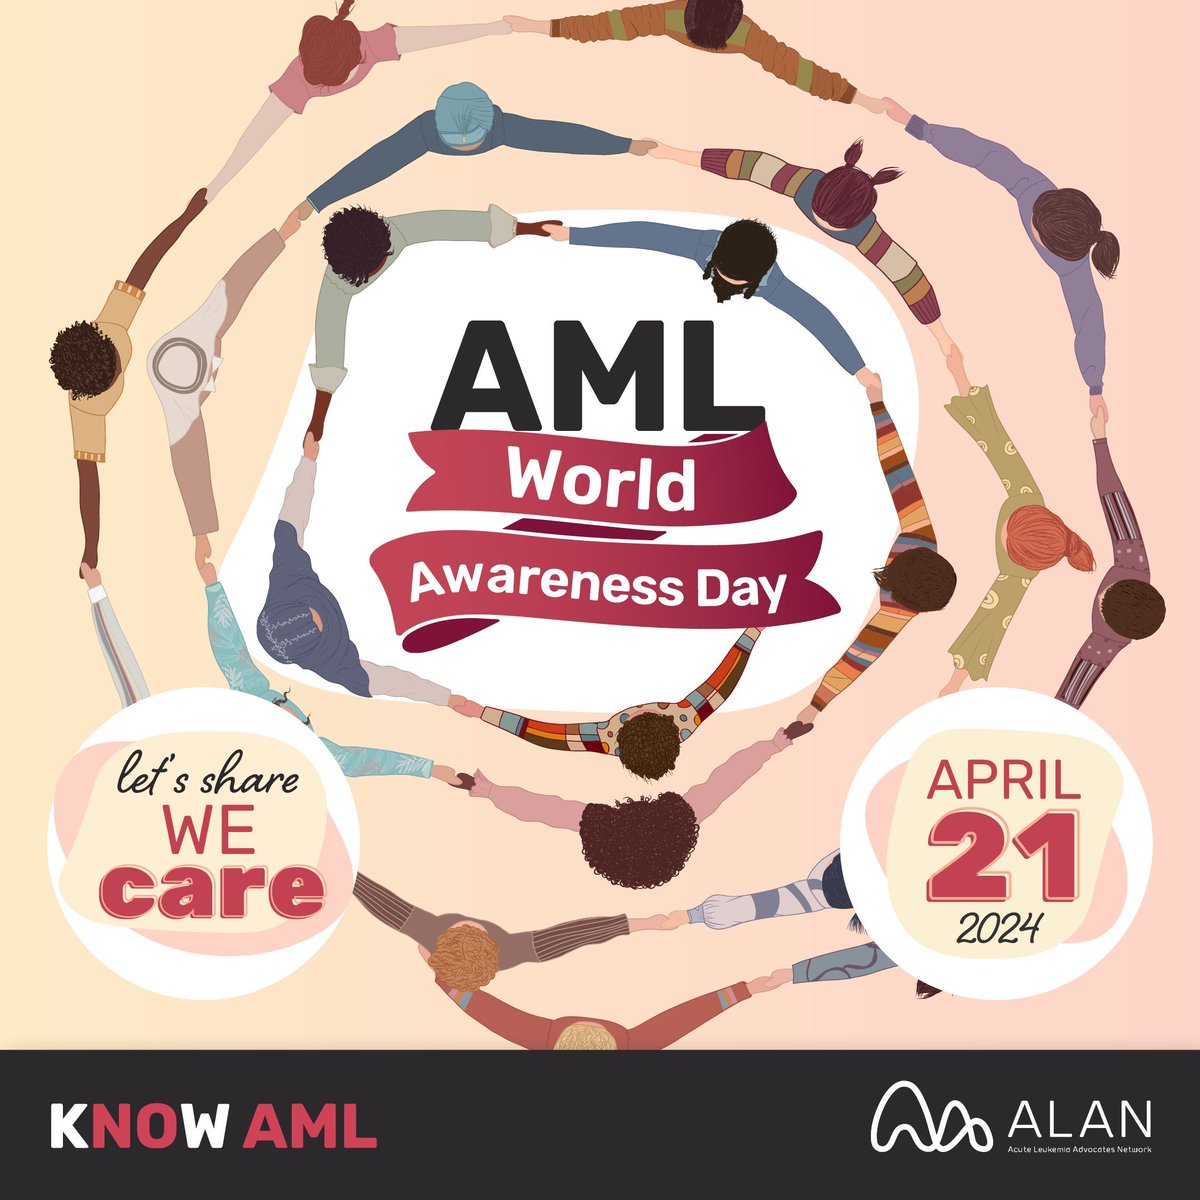 Today is #AMLWorldAwarenessDay! This is the one day of the year when people from all around the world come together to help raise awareness of acute myeloid leukemia. Learn more at Know-AML.com #KnowAML #AML